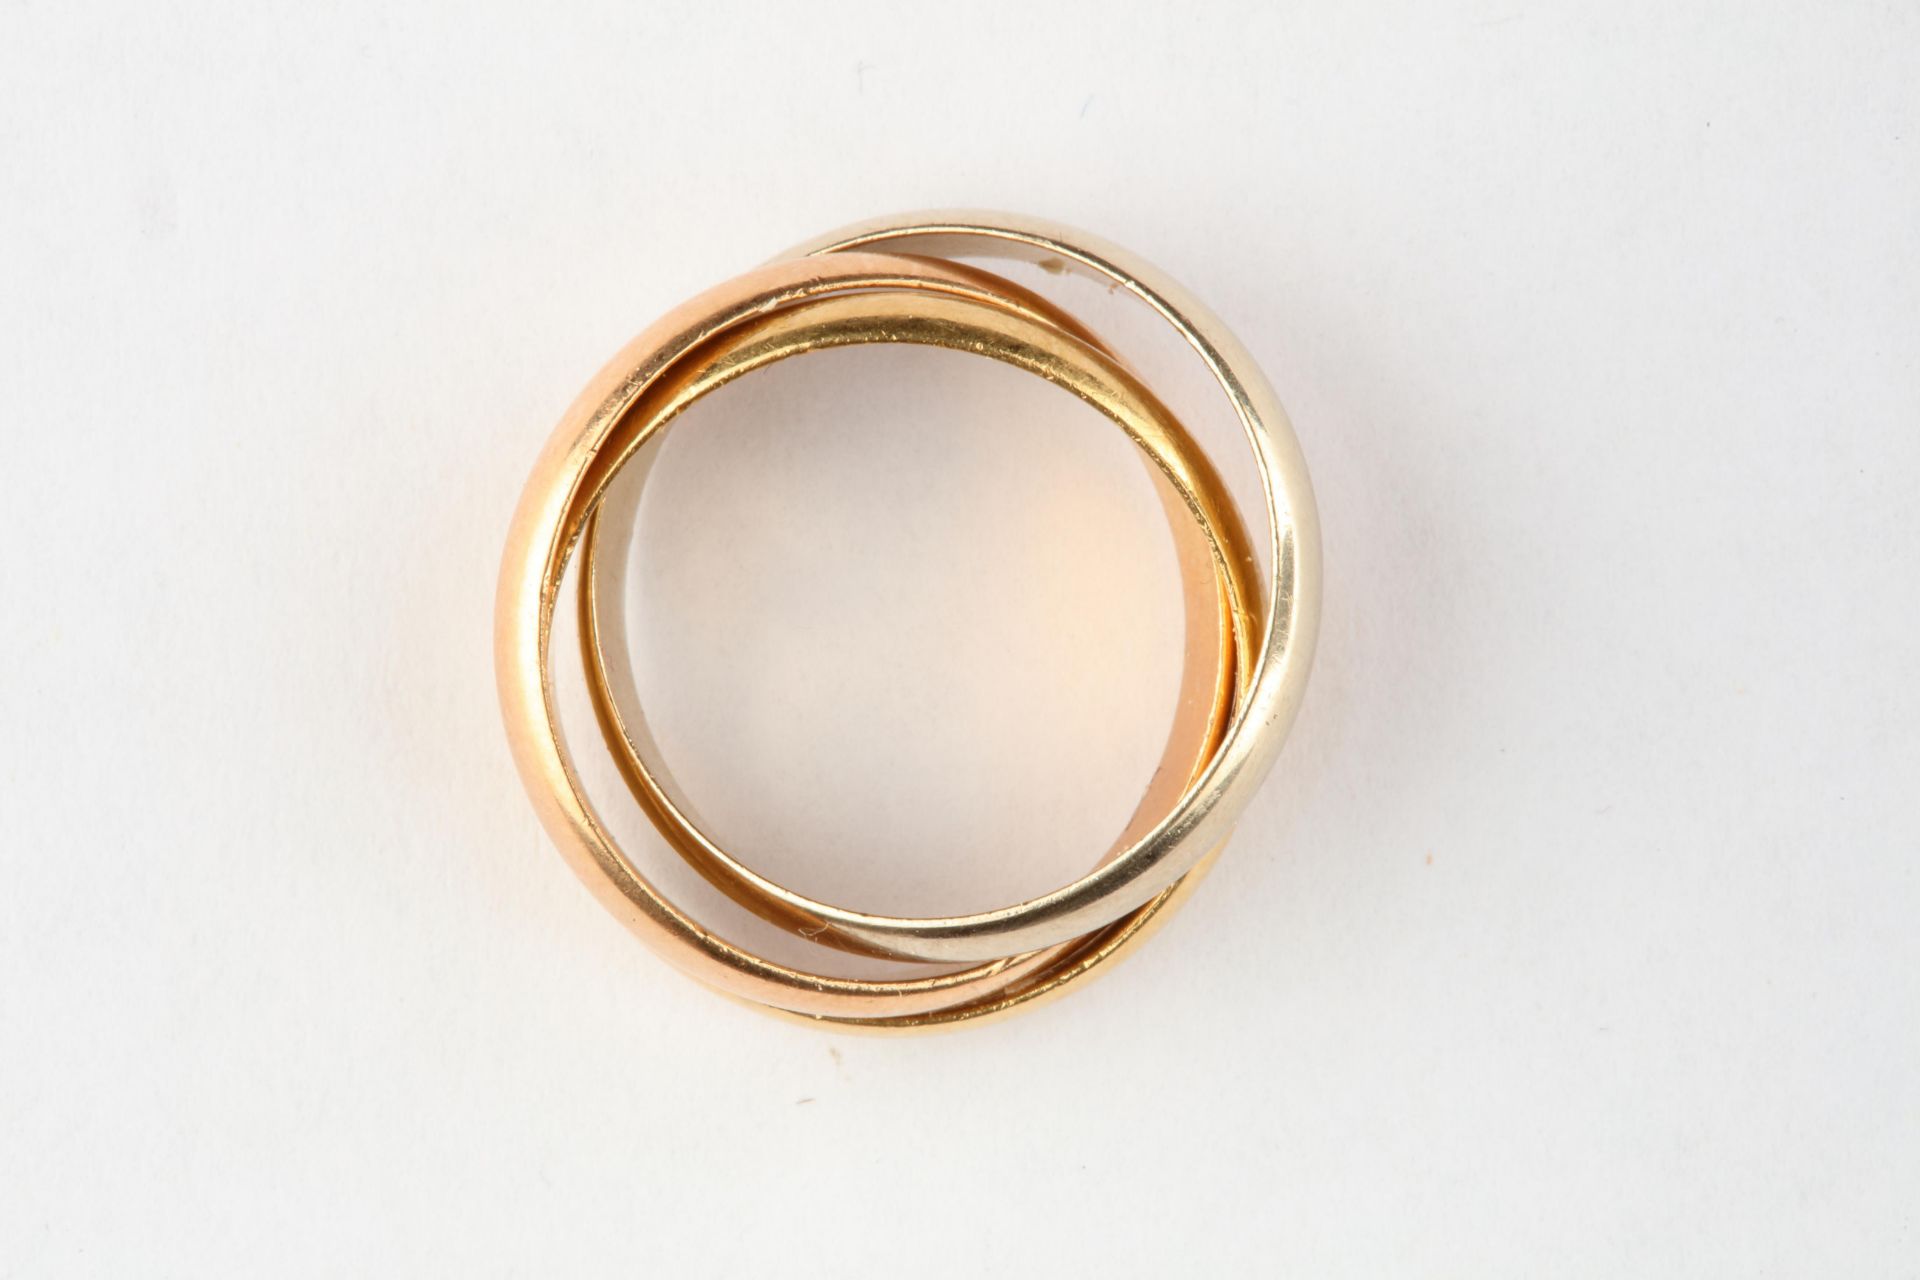 No VAT Cartier Tri Gold Trinity Ring With 18k Yellow Gold, White Gold And Rose Gold - Image 2 of 3